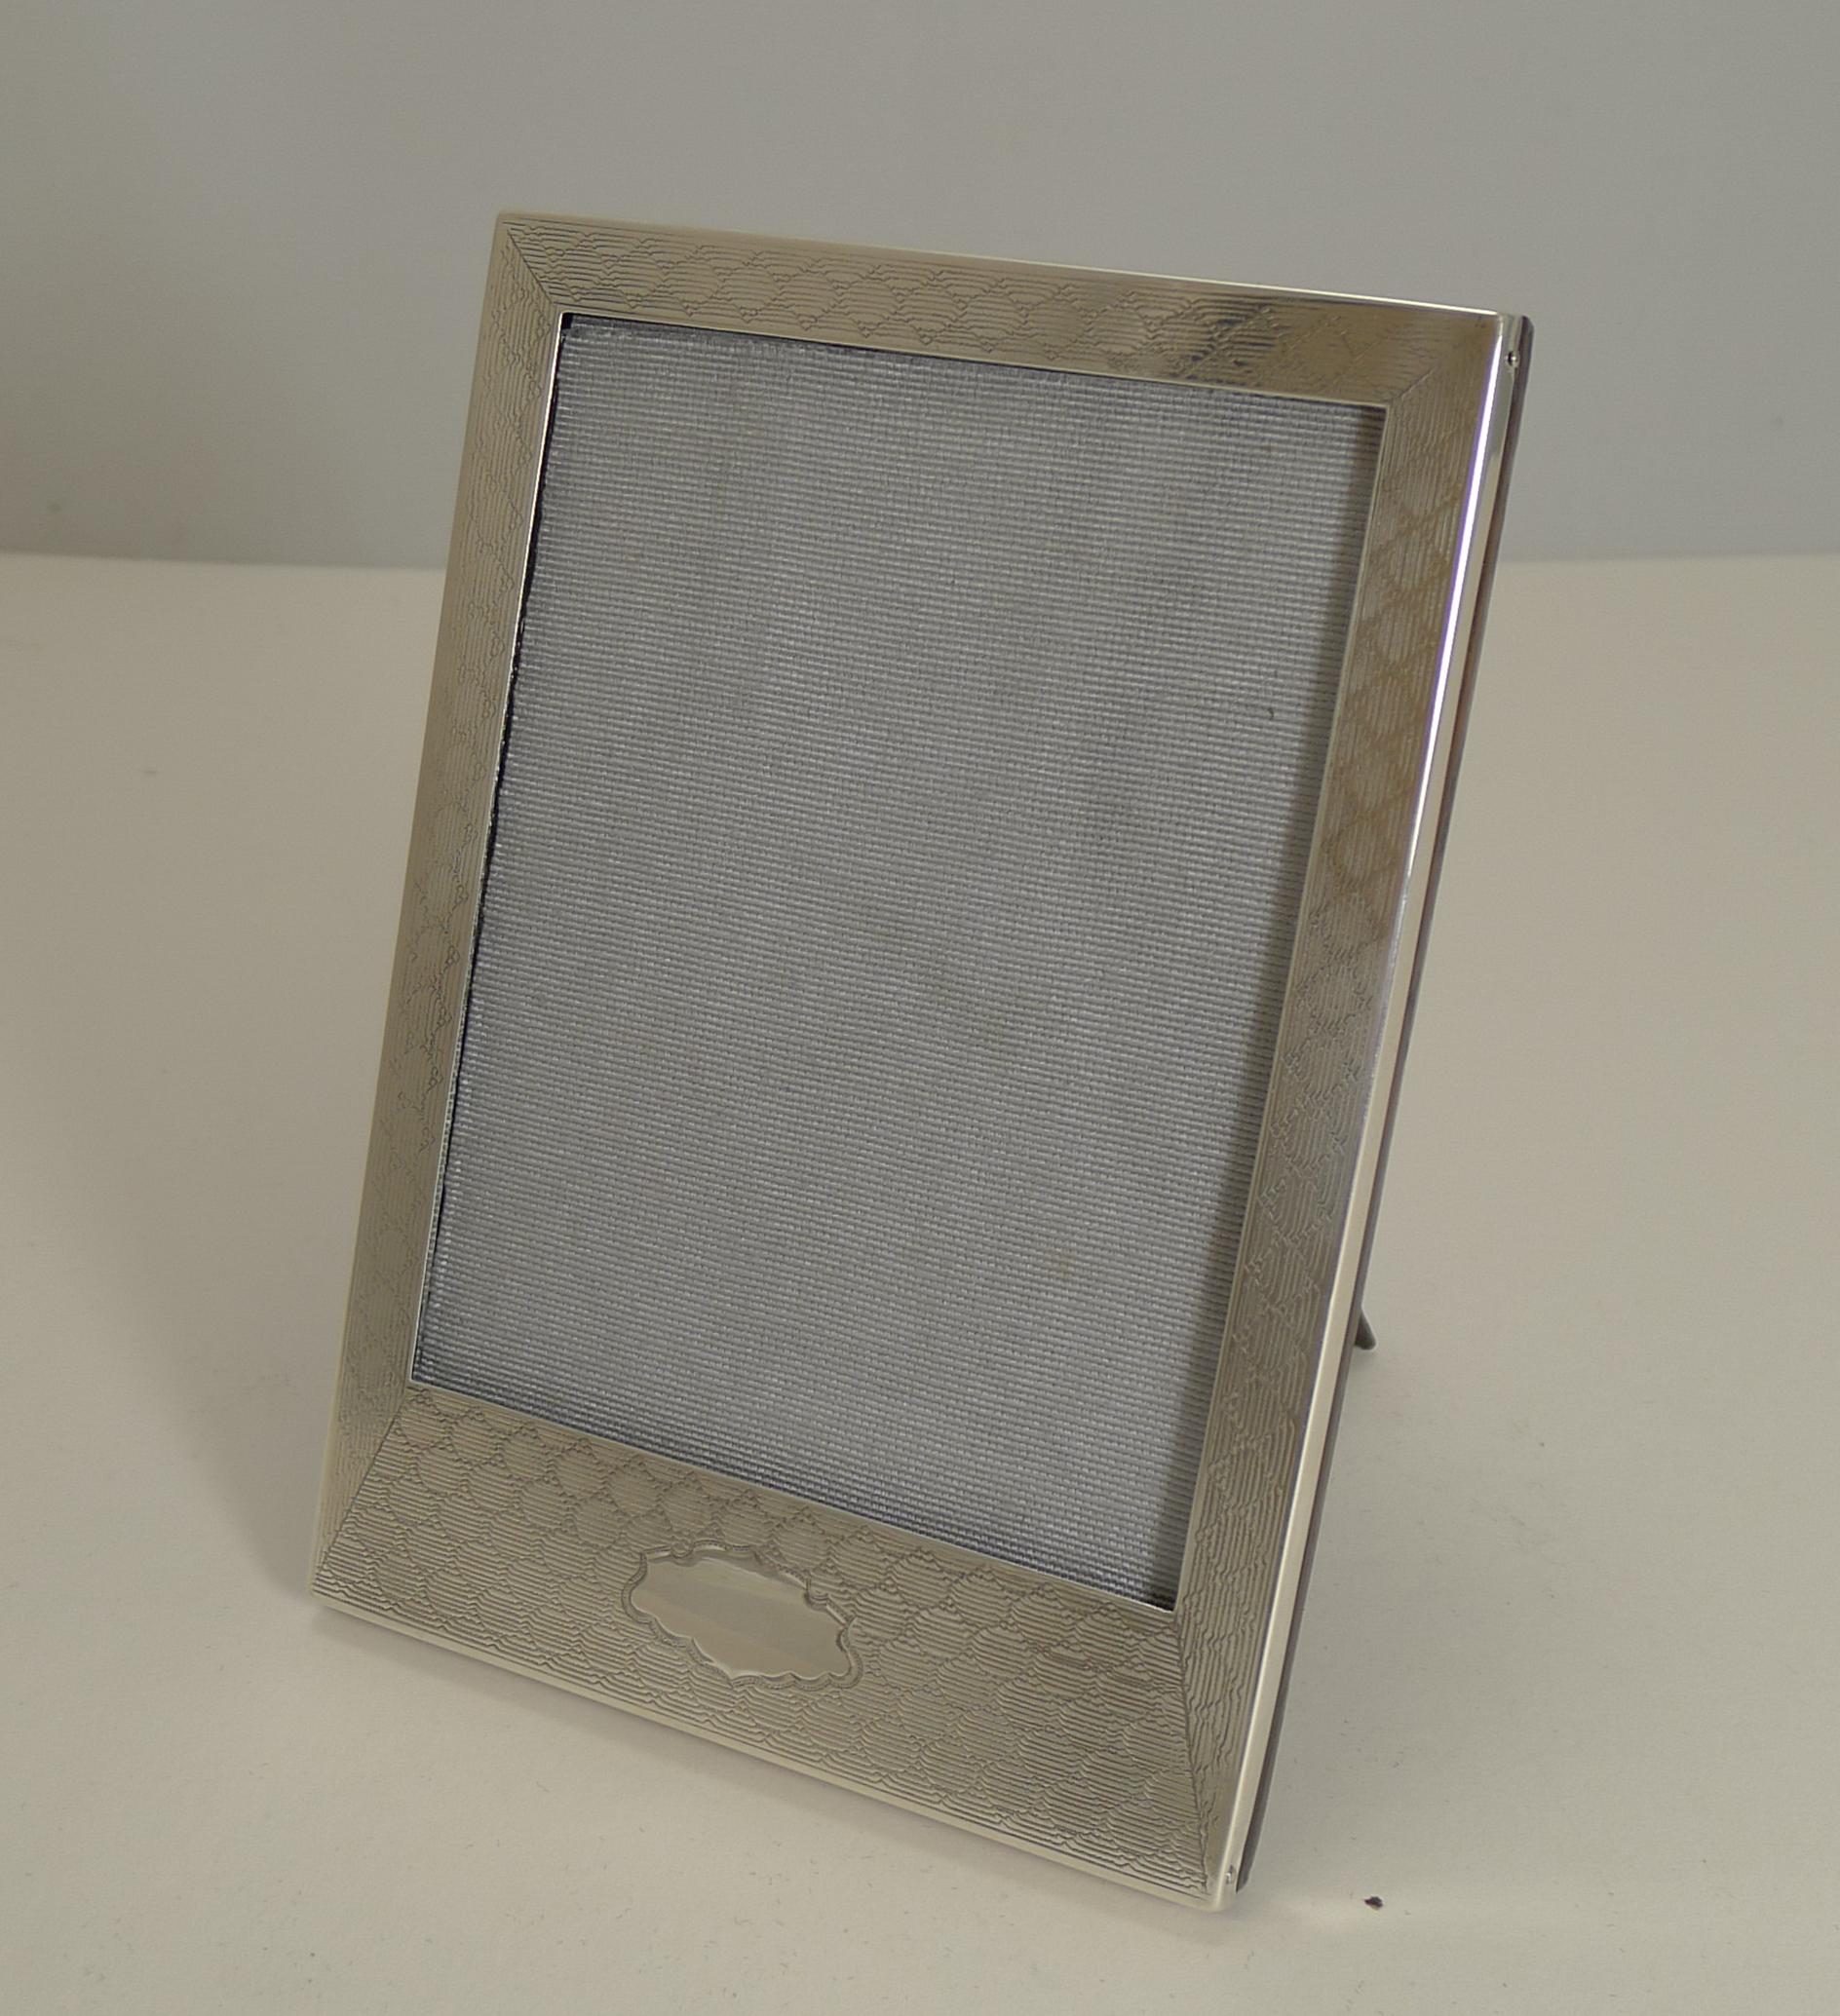 A very smart and elegant photo frame made from English sterling silver with a magnificent engine turned decoration incorporating a shaped vacant cartouche at the bottom.

The back is made from solid English oak, with a folding easel stand. The